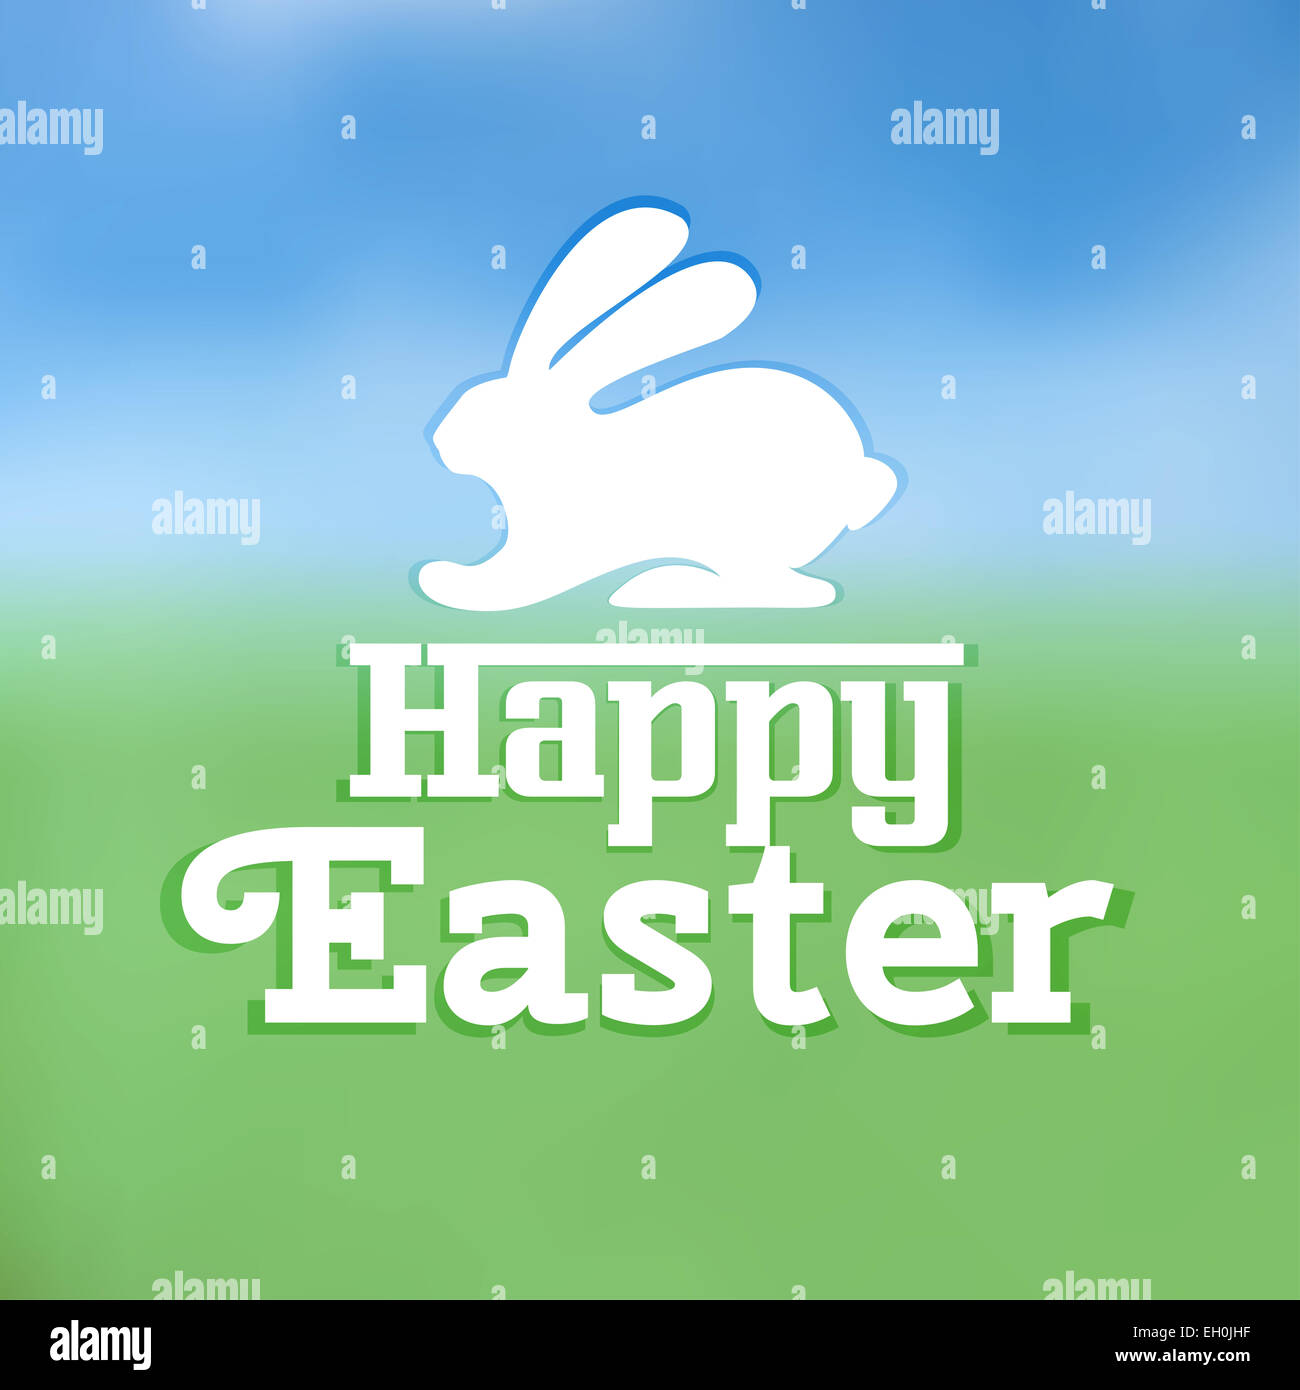 Typographic element text Happy Easter with rabbit silhouette Stock Photo